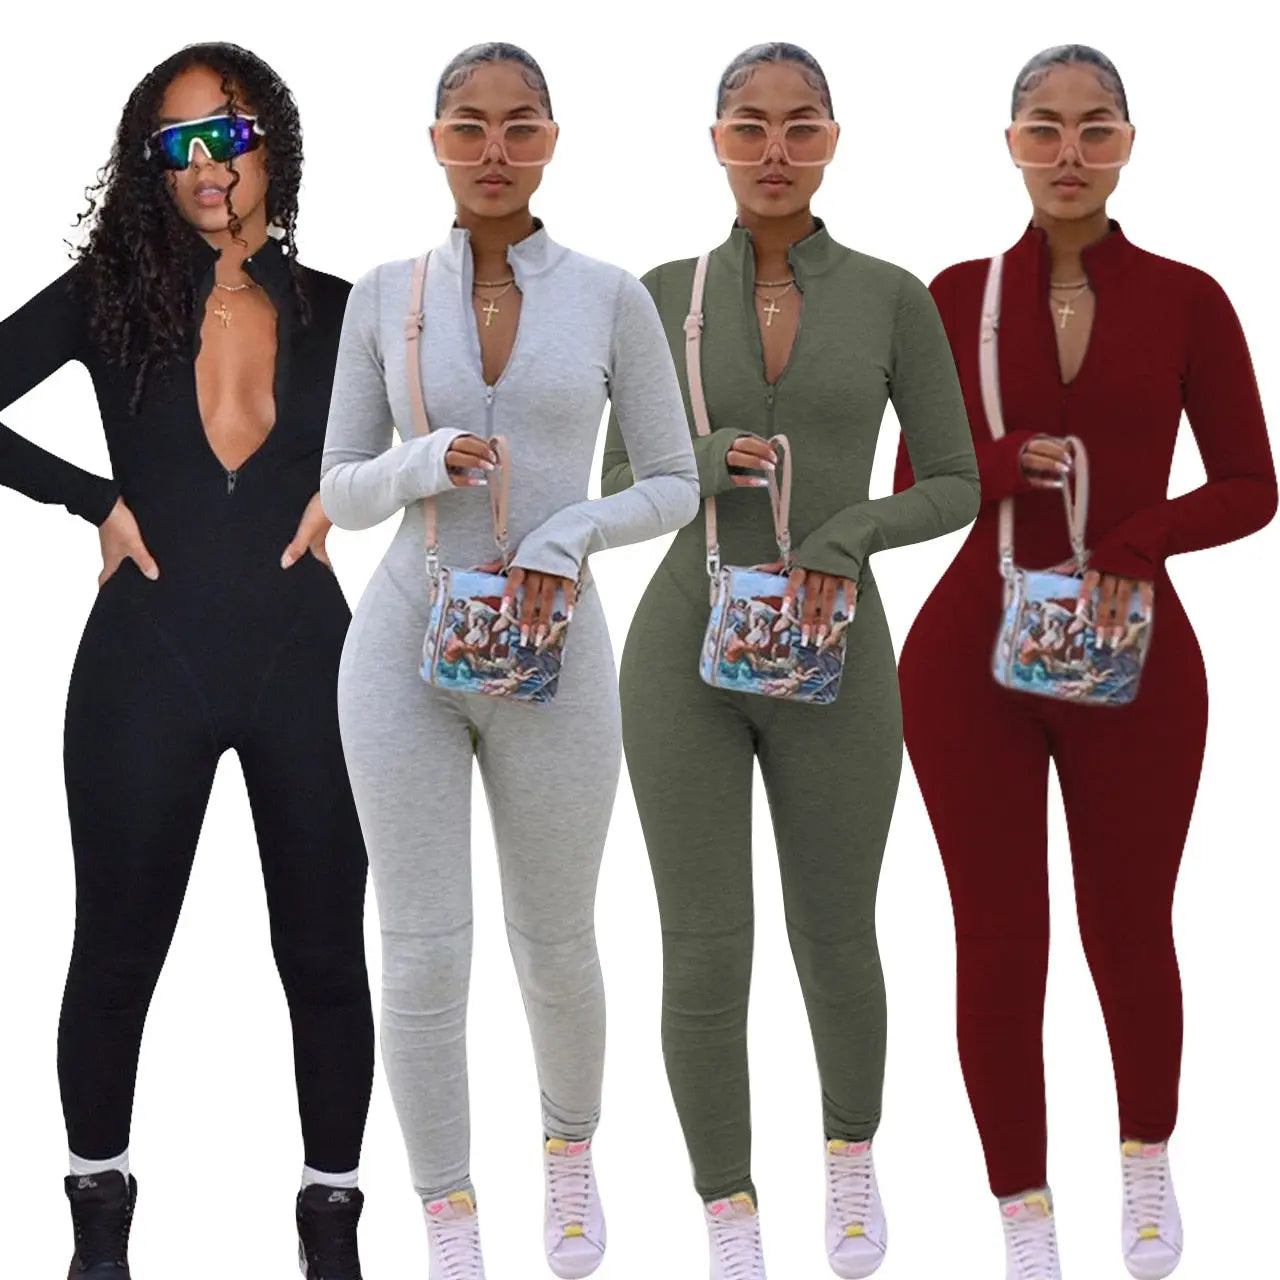 Echoine Zipper Long Sleeve Jumpsuit Green Gray Skinny Bodycon Sexy Rompers Autumn Rompers Party Clubwear Outfits Overalls Women.